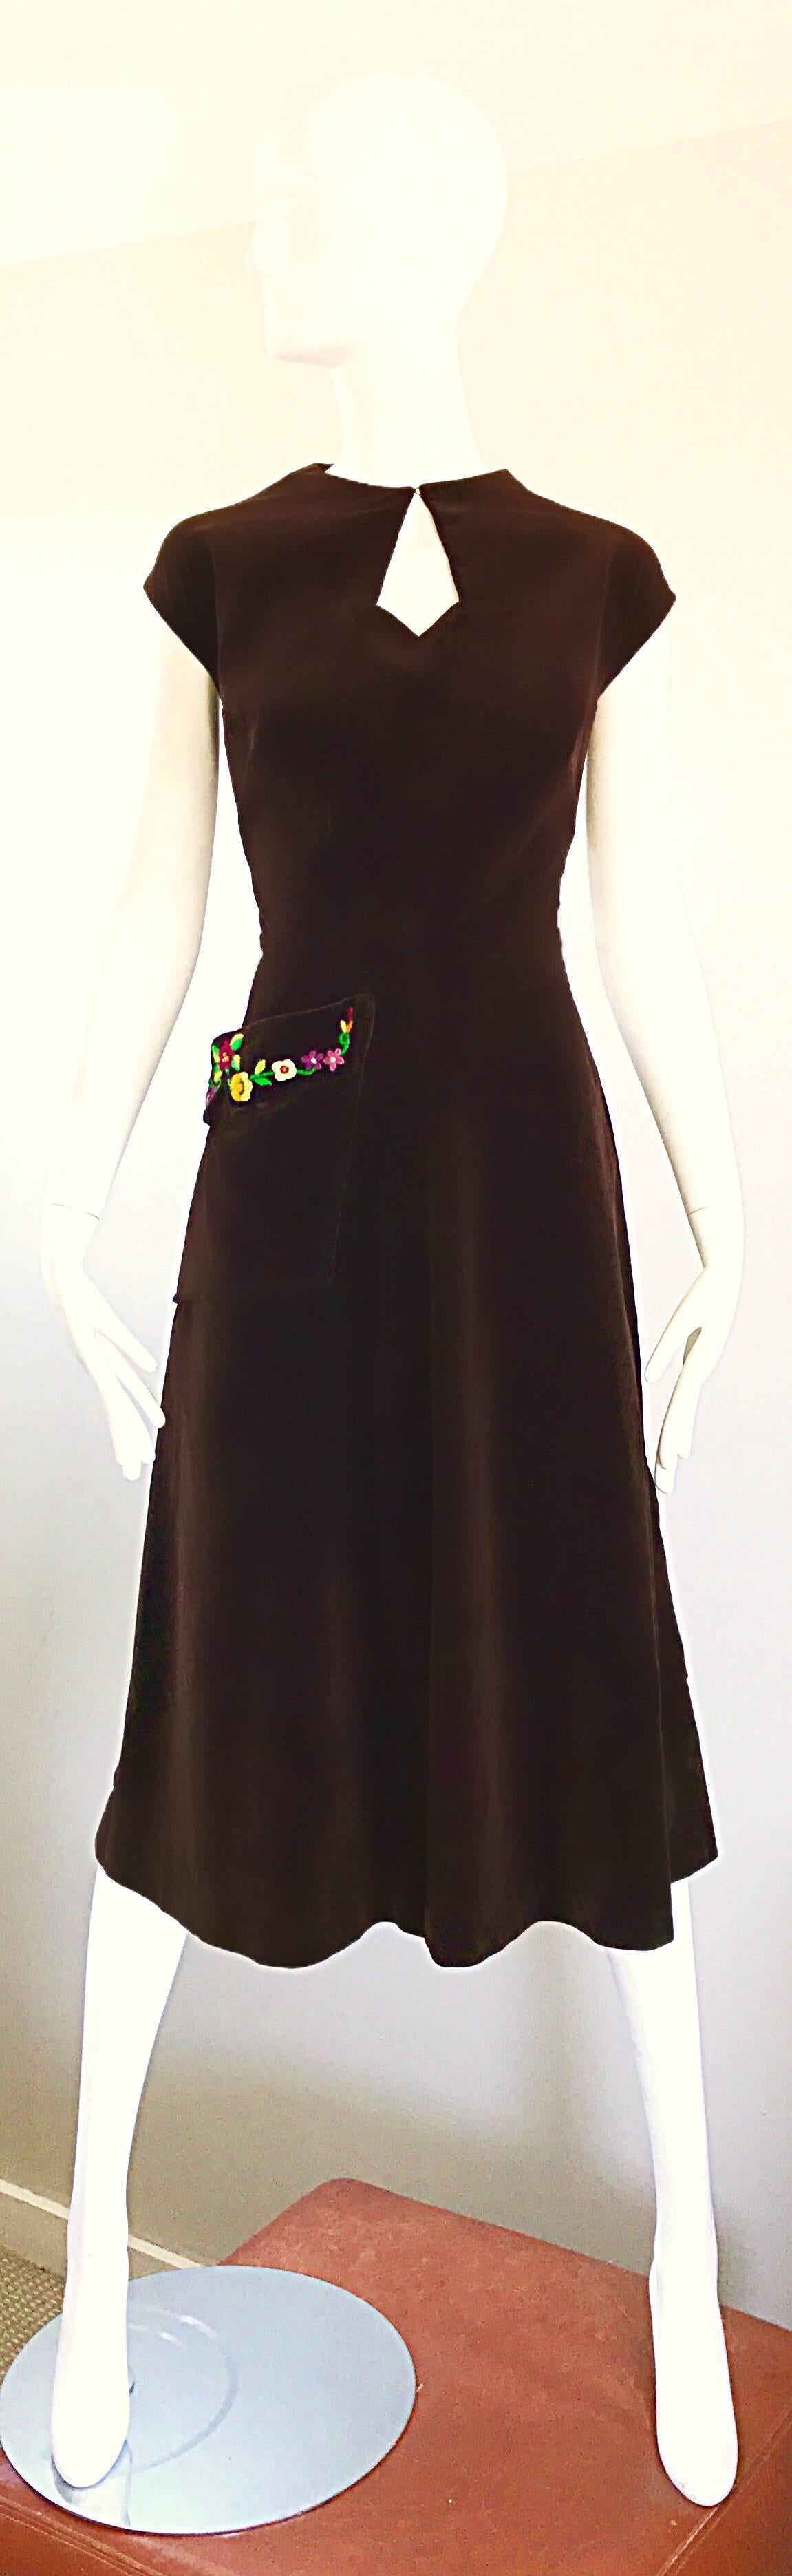 Rare 1940s MARTHA GALE chocolate brown velvet dress! Features soft brown velvet, with a pocket on the right side hip with hand embroidered bright flowers. Keyhole detail above the bust with hook-and-eye closure. Full metal zipper up the side with